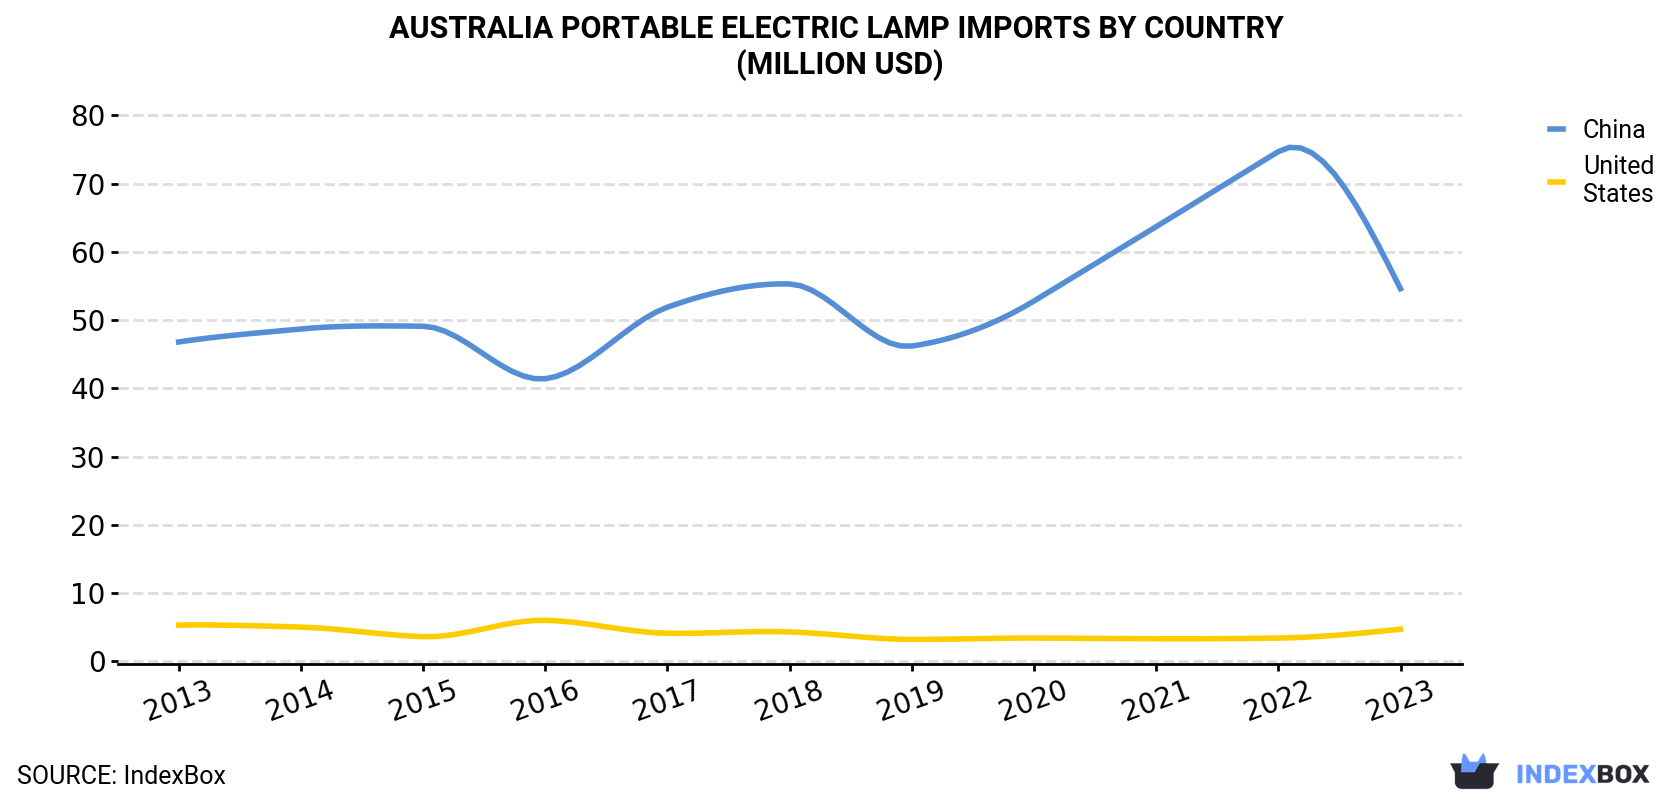 Australia Portable Electric Lamp Imports By Country (Million USD)